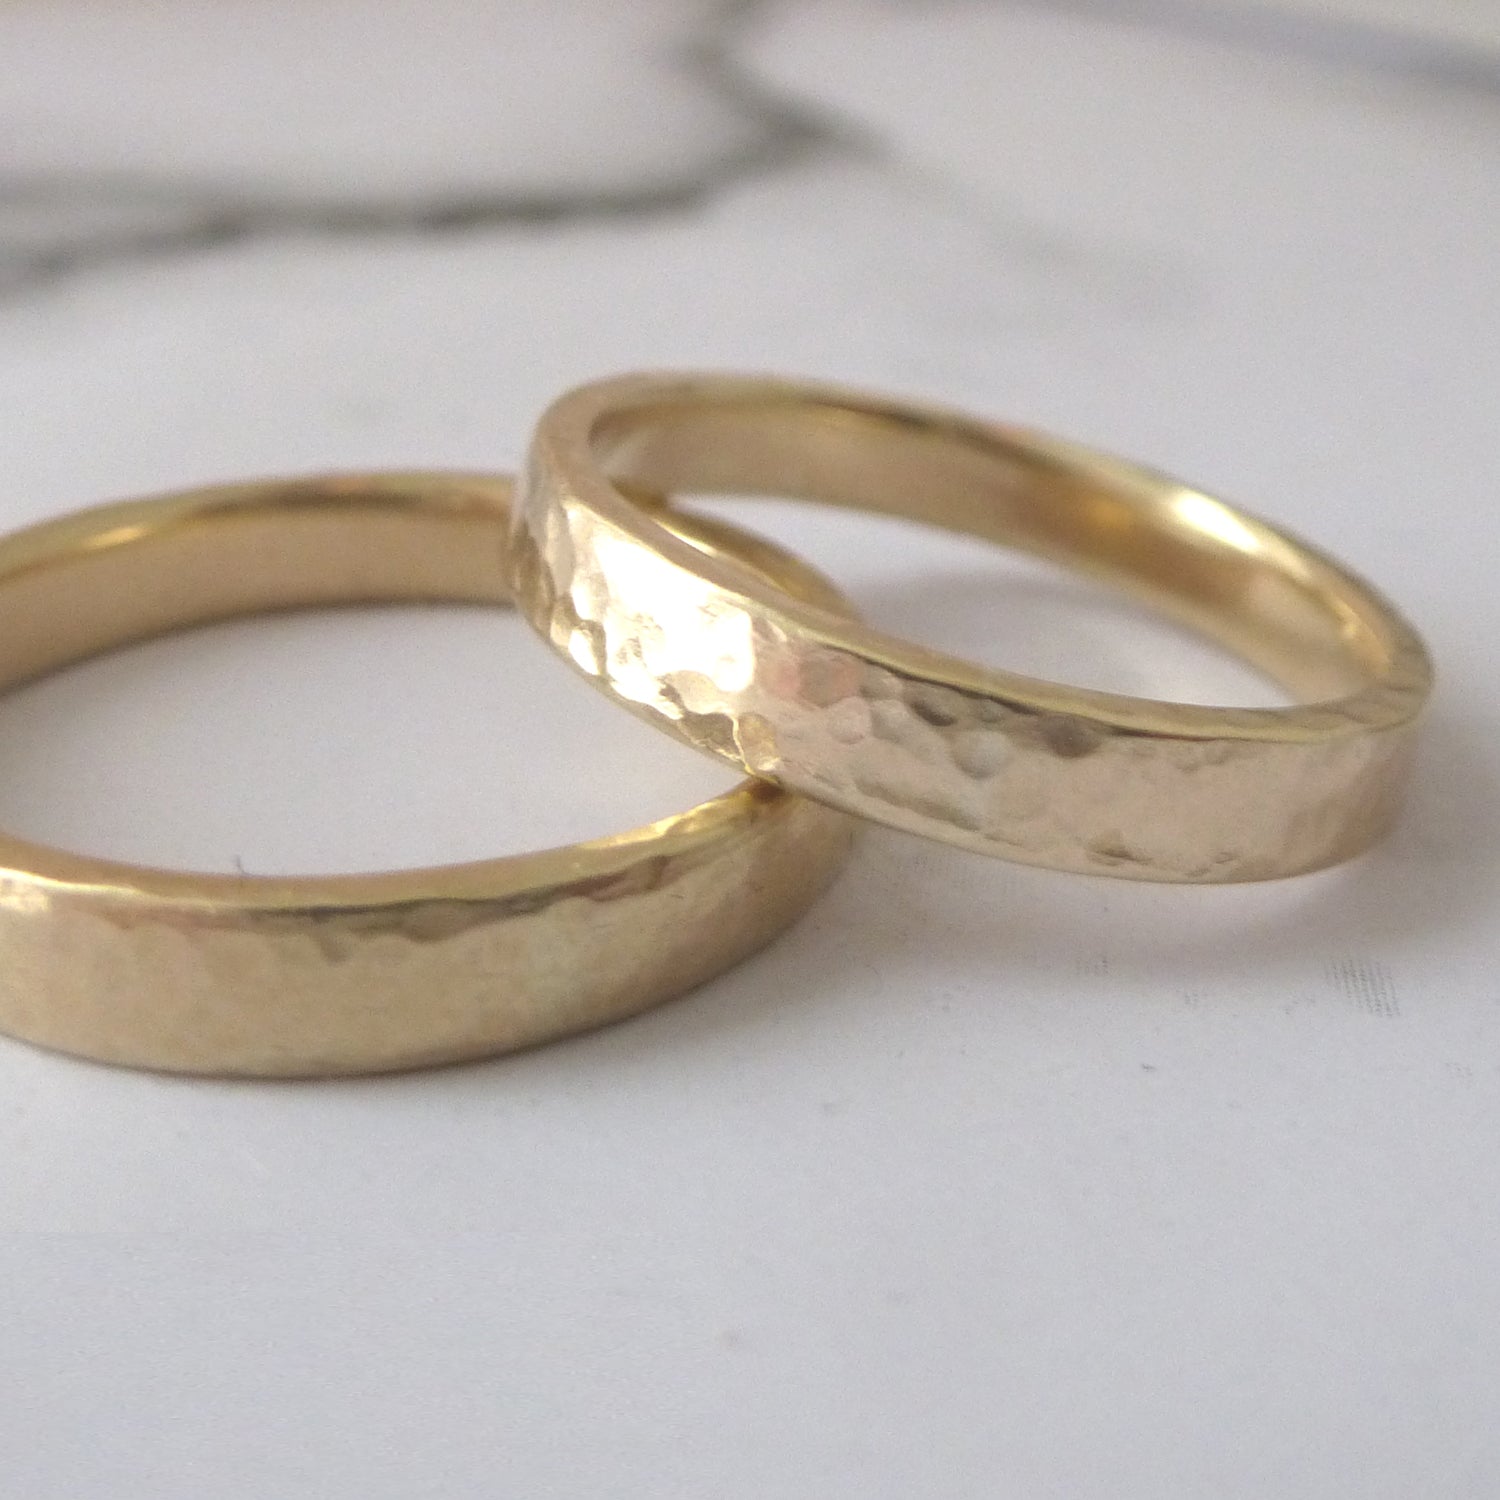 A pair of wedding bands in 9ct yellow gold, recycled, hammered finish